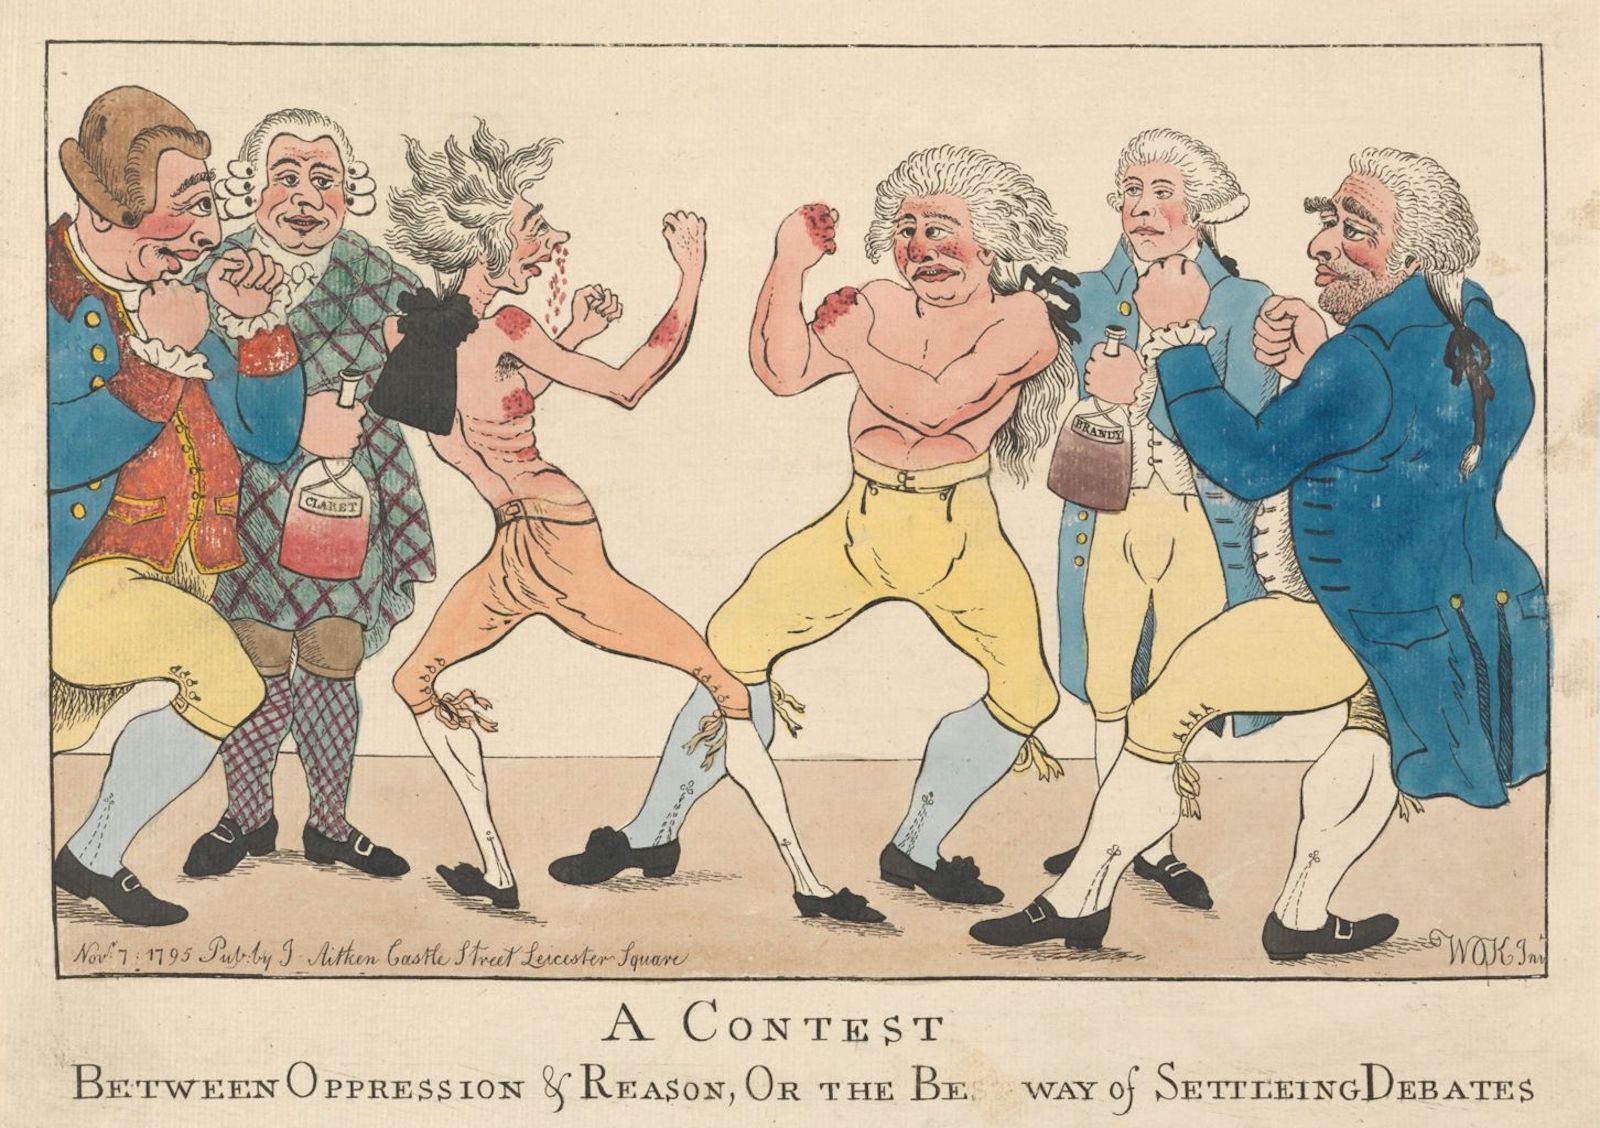 ‘A Contest between Oppression and Reason, On the Best Way of Settleing Debates’ by William O'Keefe, c. 1795. Yale Center for British Art, Paul Mellon Collection. Public Domain.